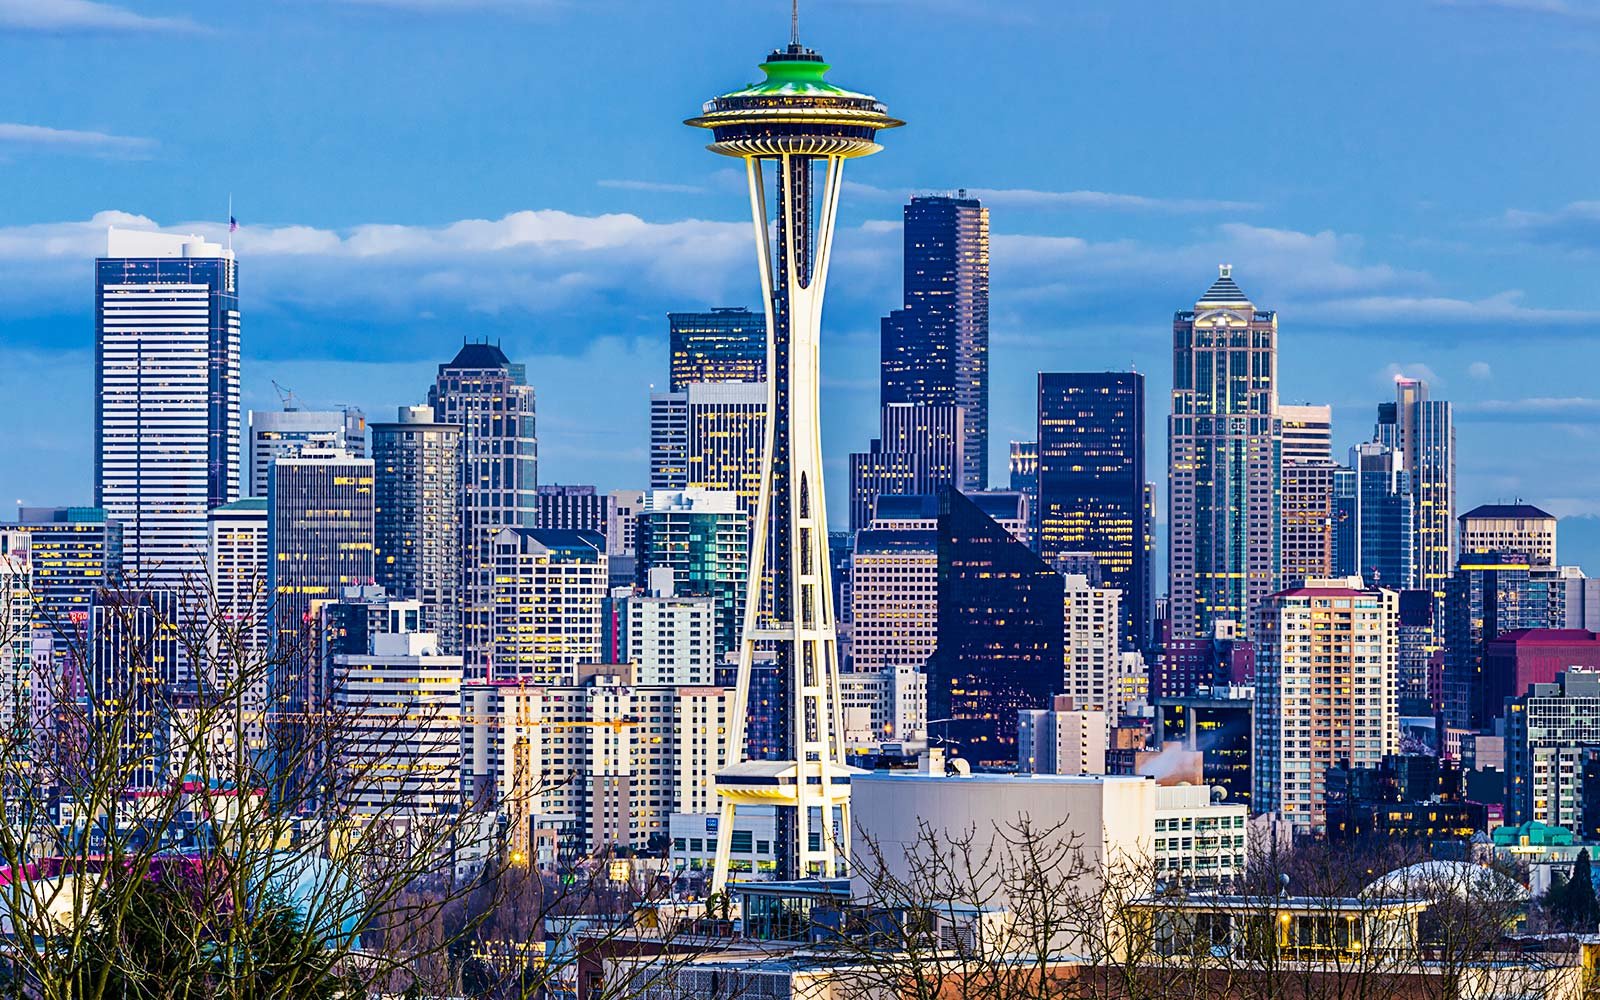 Seattle's Space Needle and the downtown skyline.